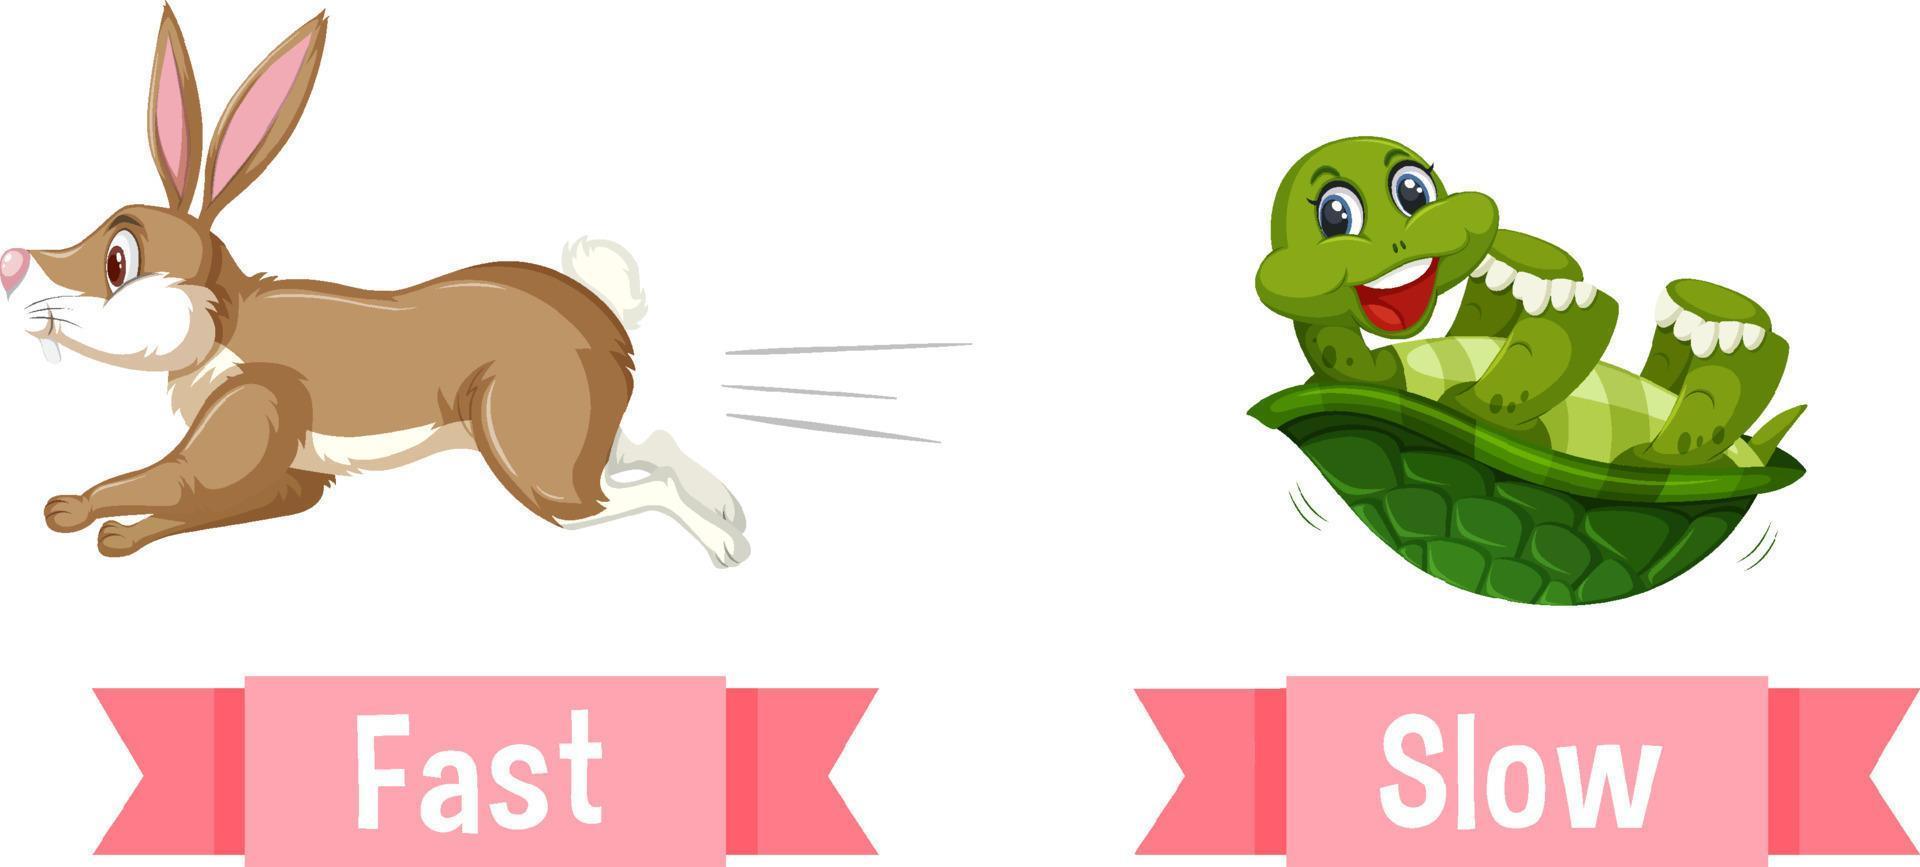 Opposite English Words fast and slow vector